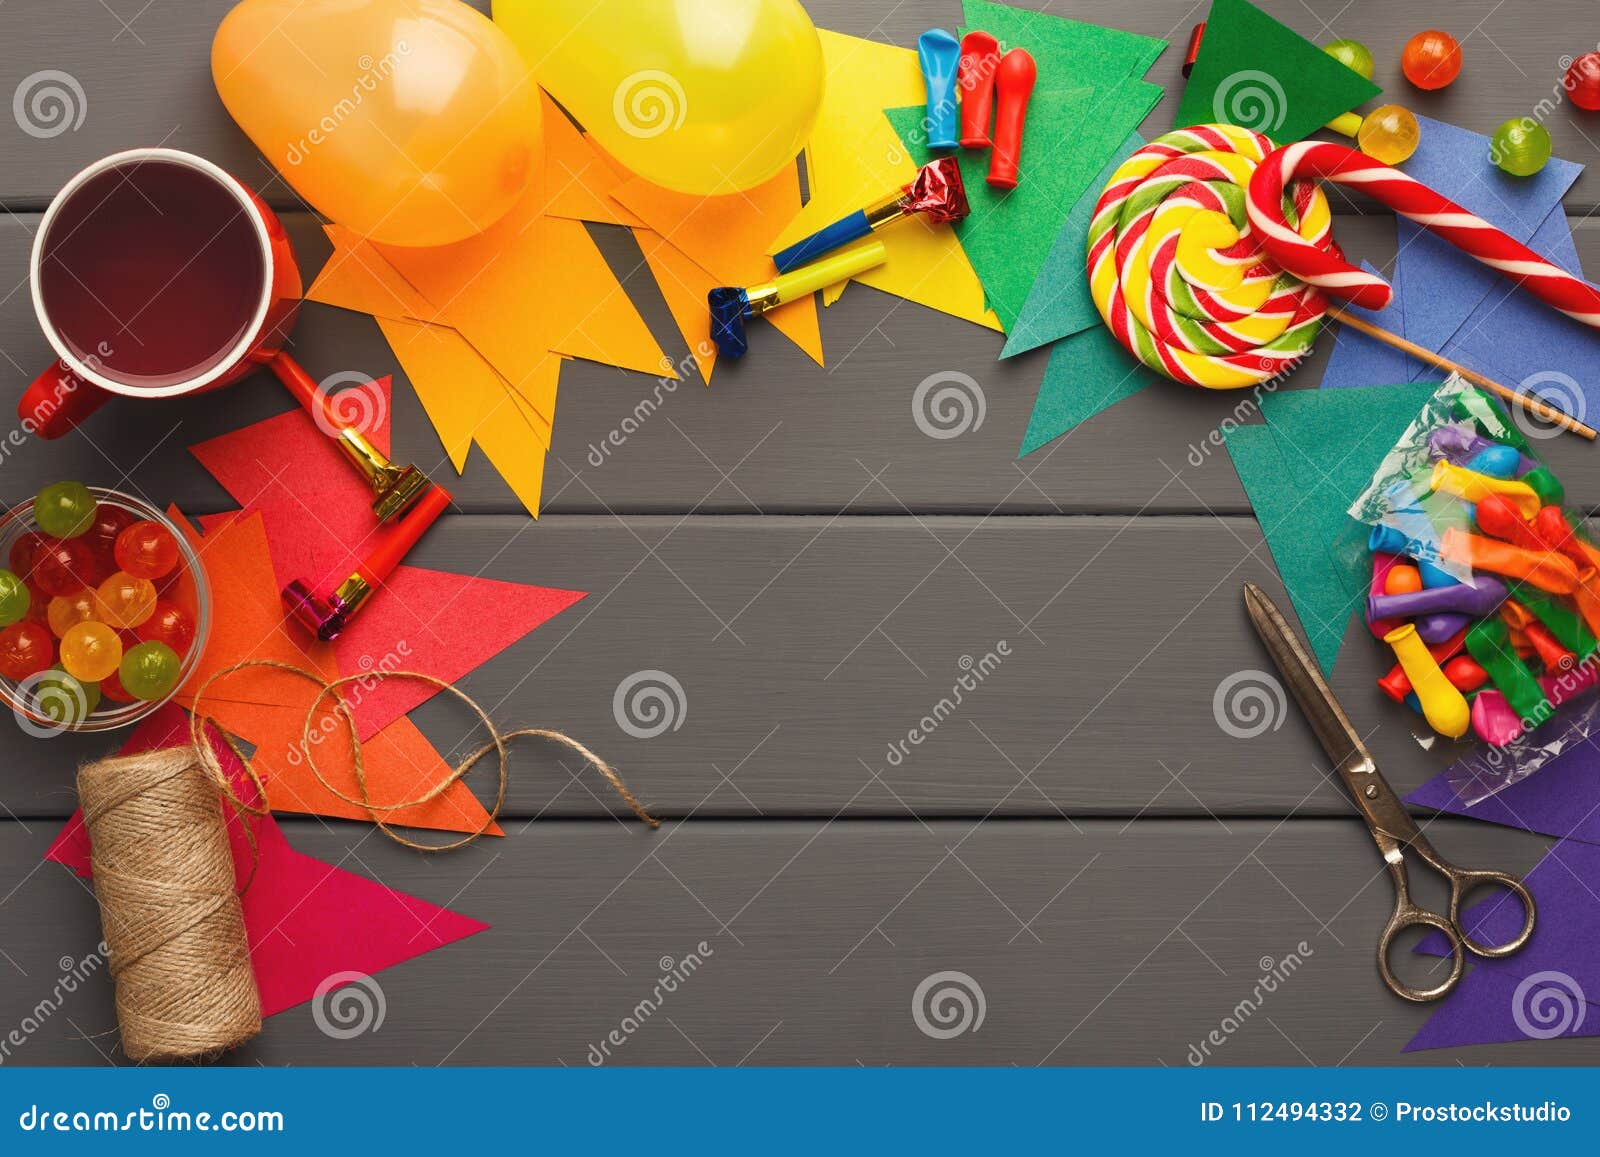 Diy Holiday Background Birthday Party Decorations Stock Photo